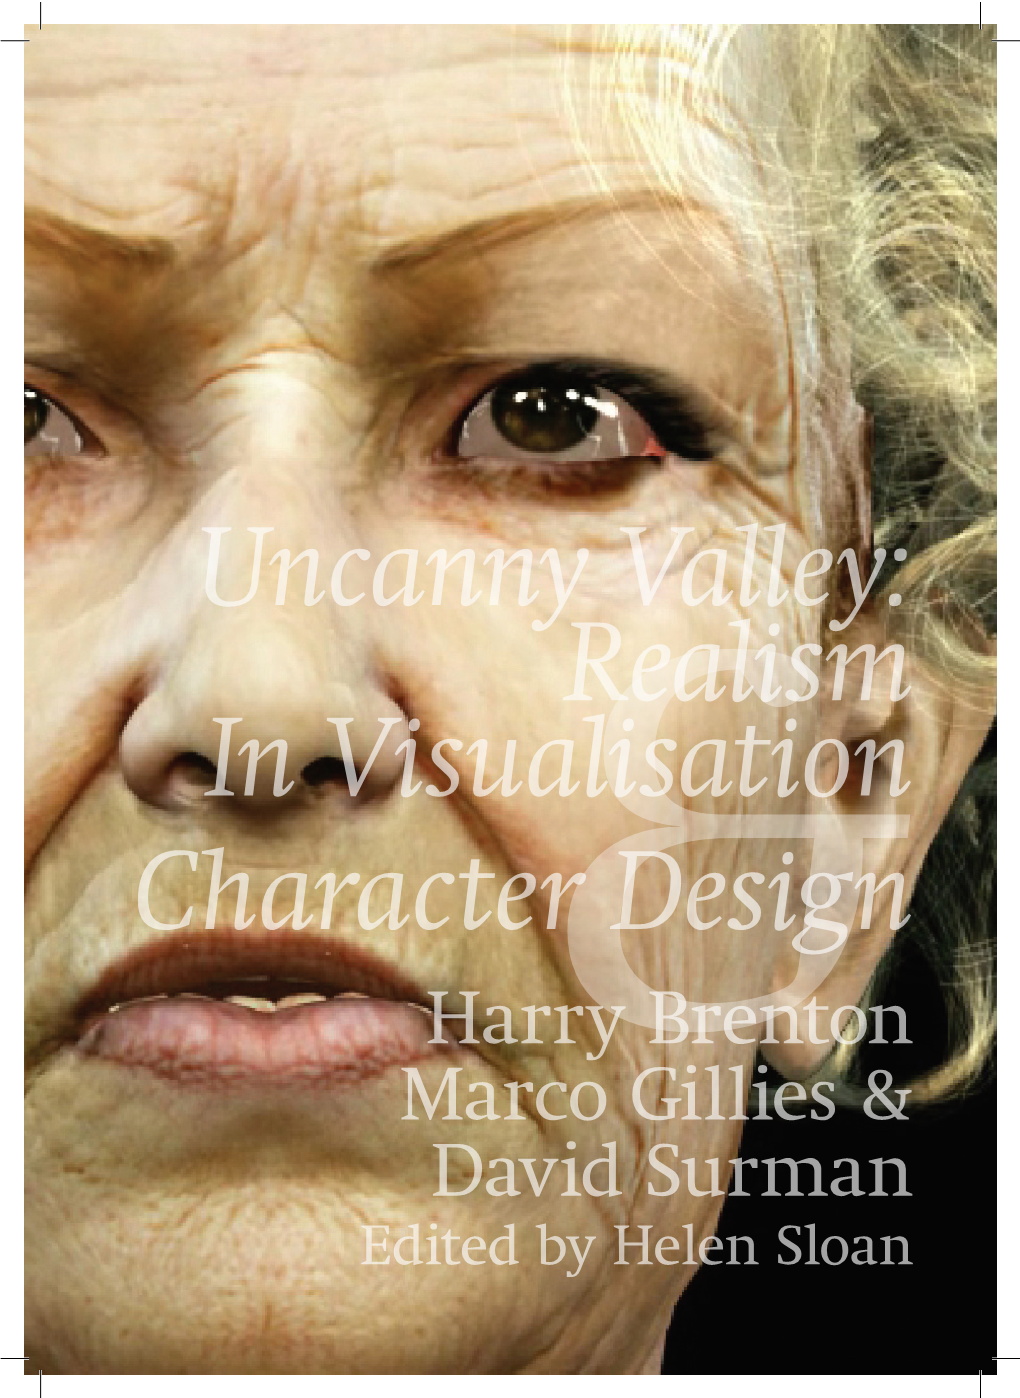 Uncanny Valley: Realism in Visualisation Character Design Harry Brenton Marco& Gillies & David Surman Edited by Helen Sloan